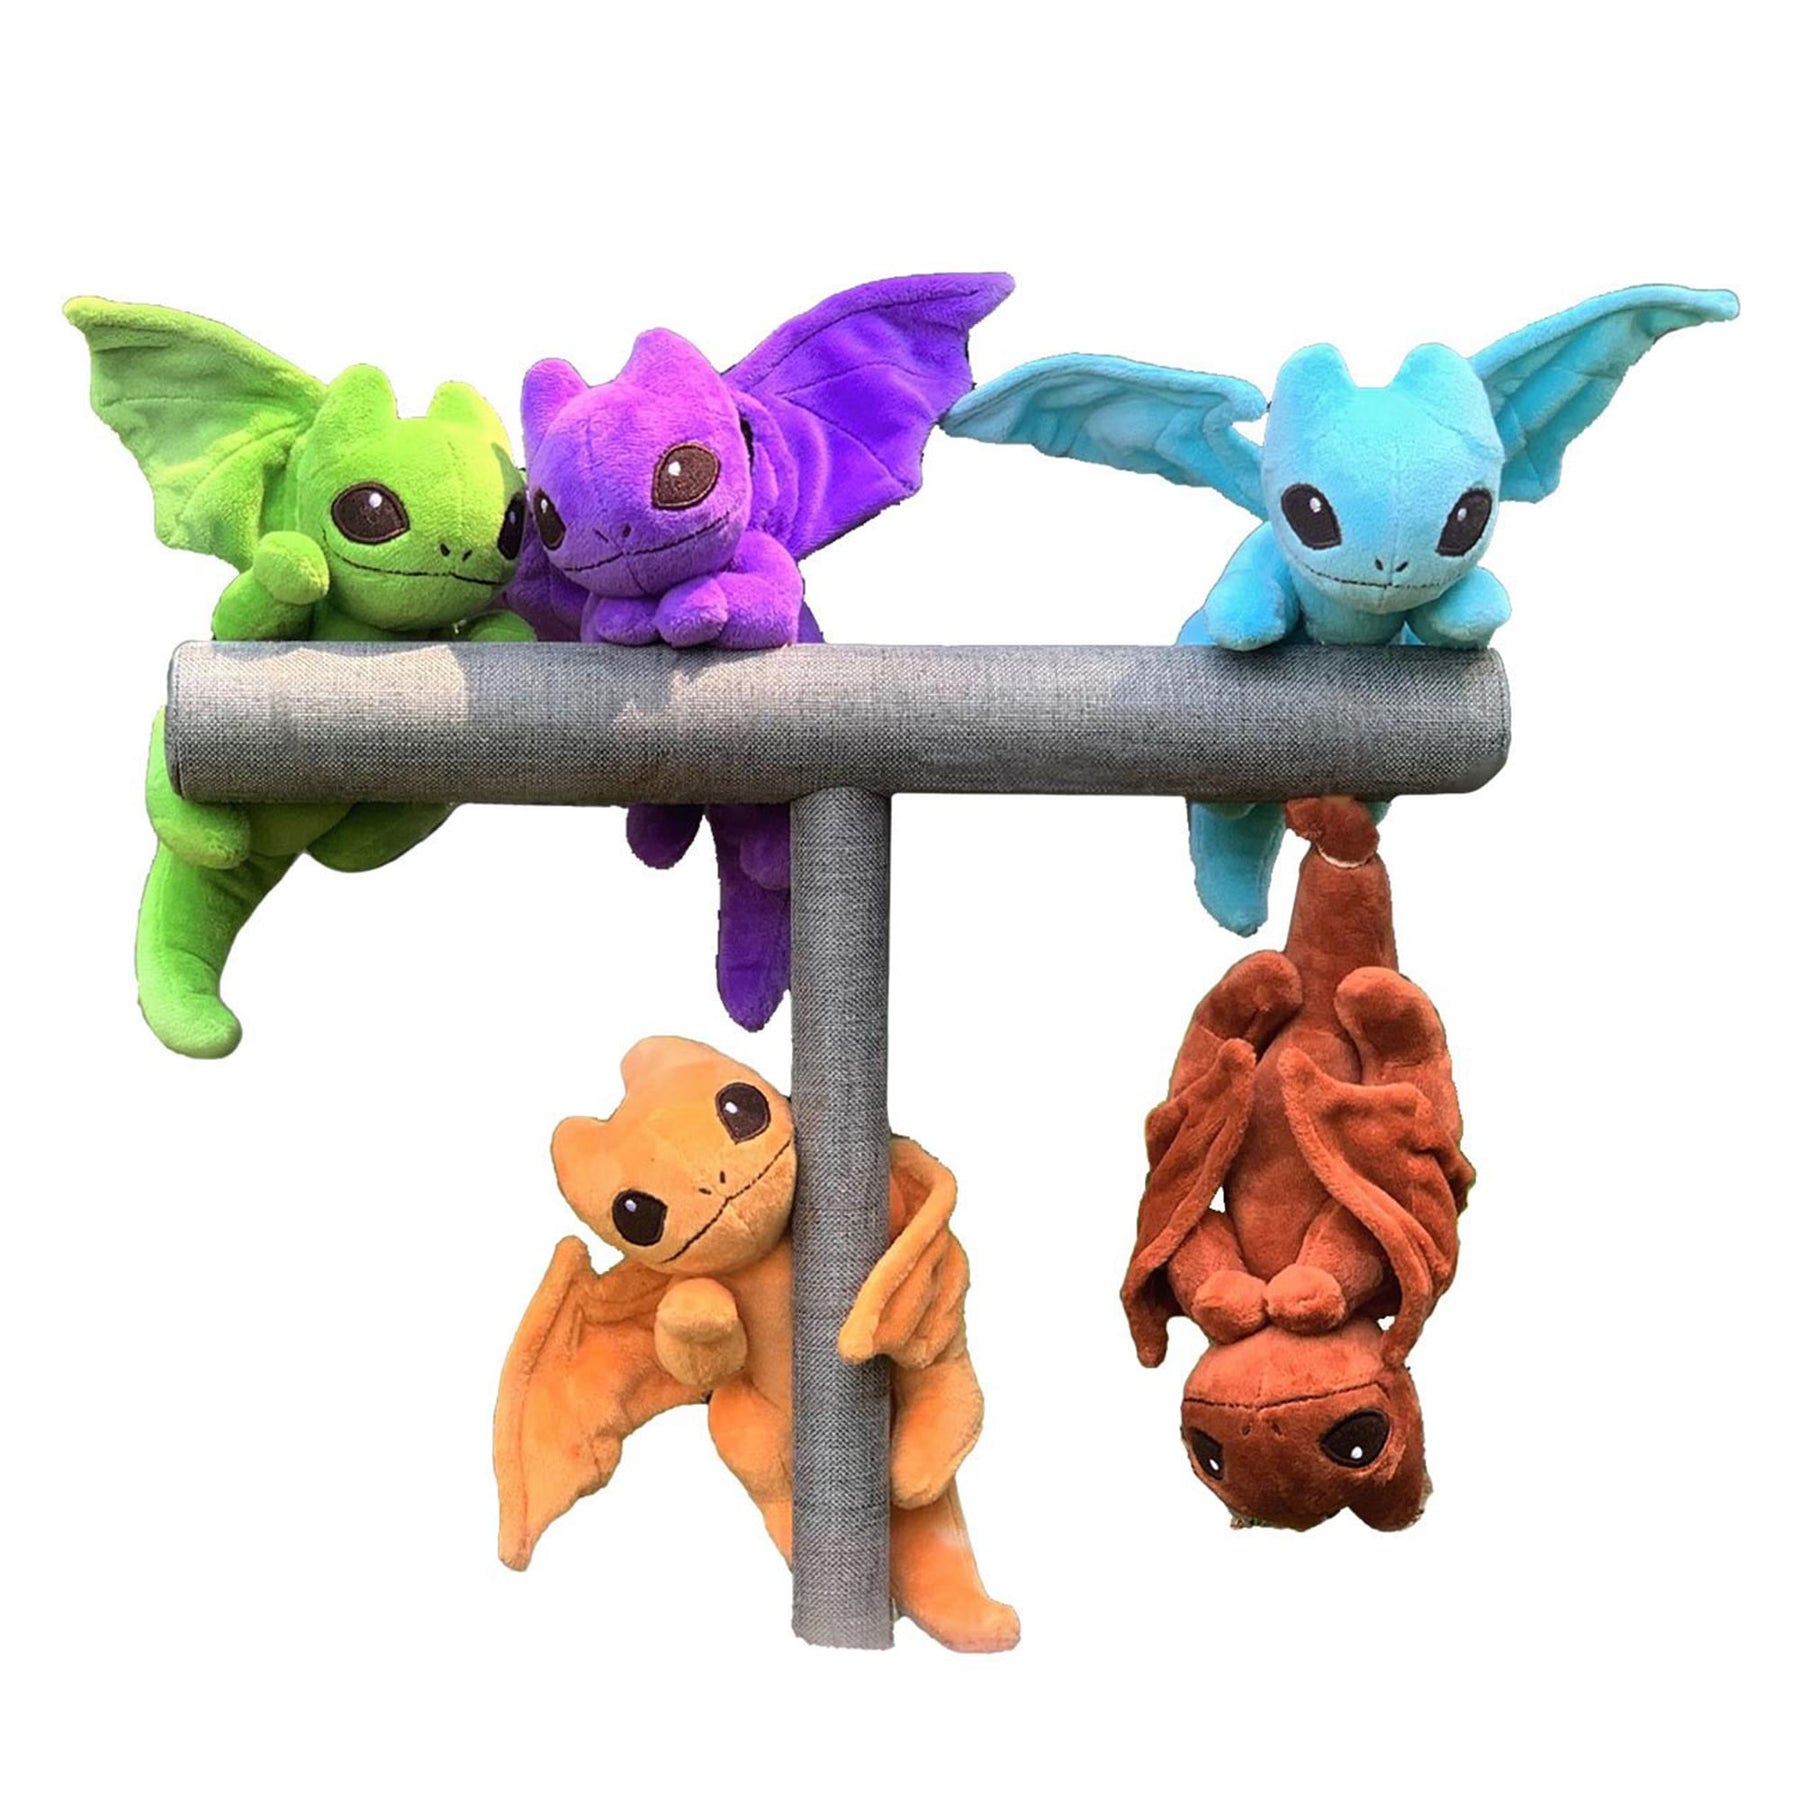 Little Embers 7 Inch Plush w/ Moveable Limbs & Magnetic Hands | Sparks (Orange)